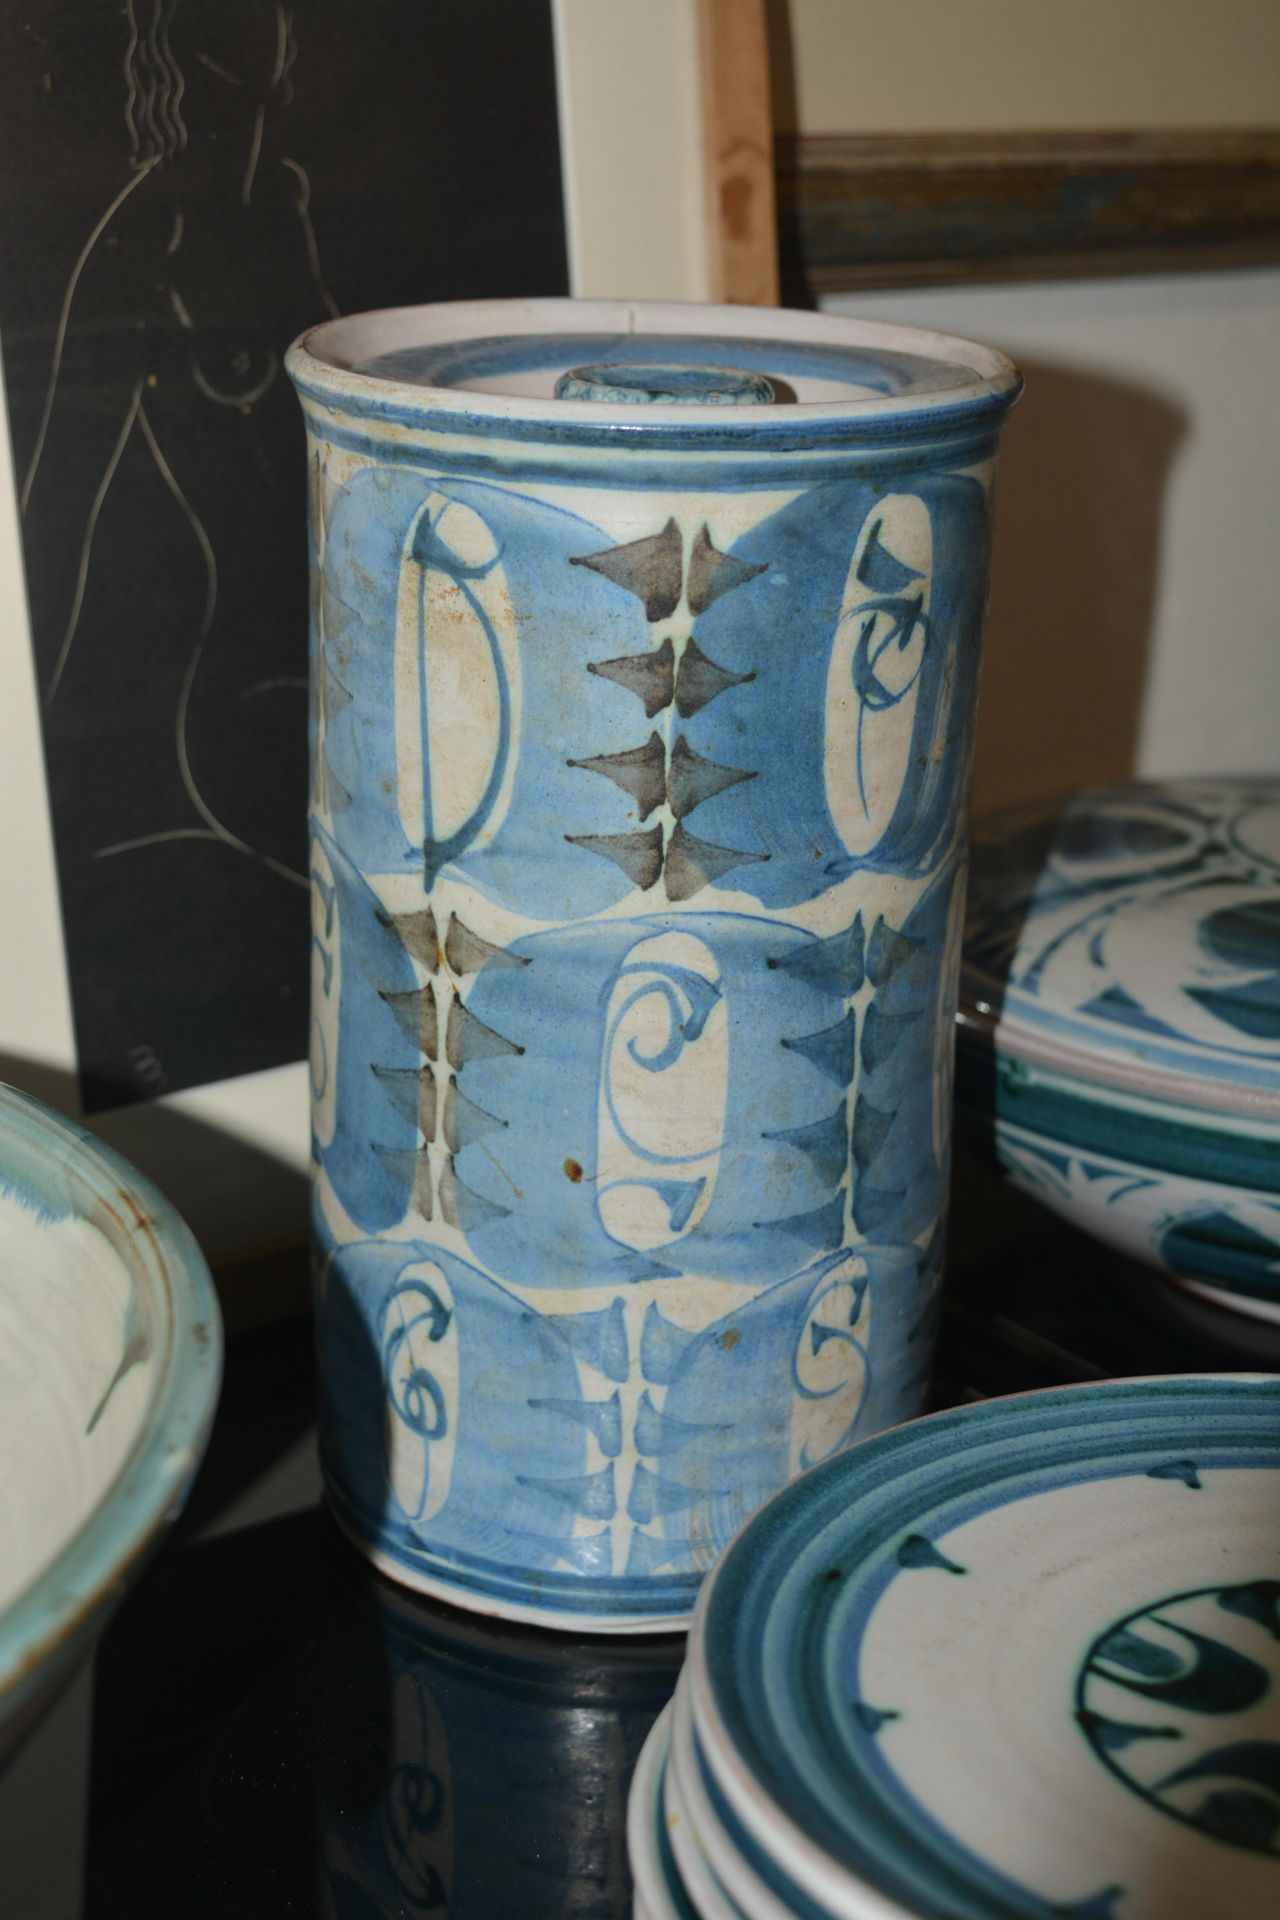 Alan Caiger-Smith (1930-2020) at Aldermaston Pottery tin-glazed earthenware dinner service, to - Image 12 of 21